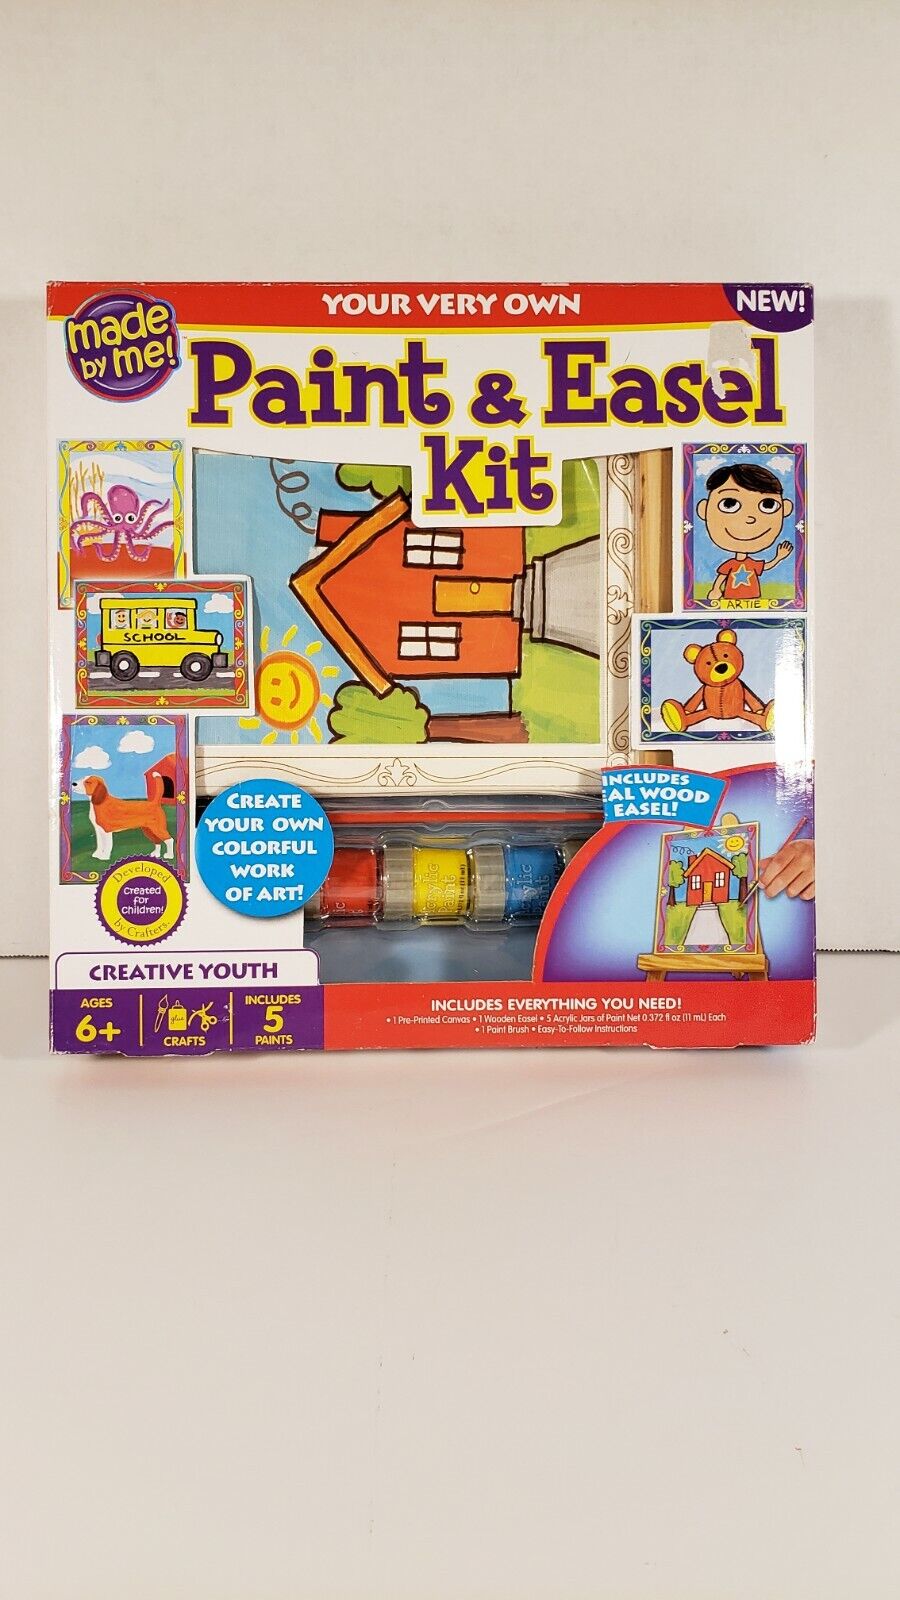 Made By Me! Your Very Own Paint & Easel Kit